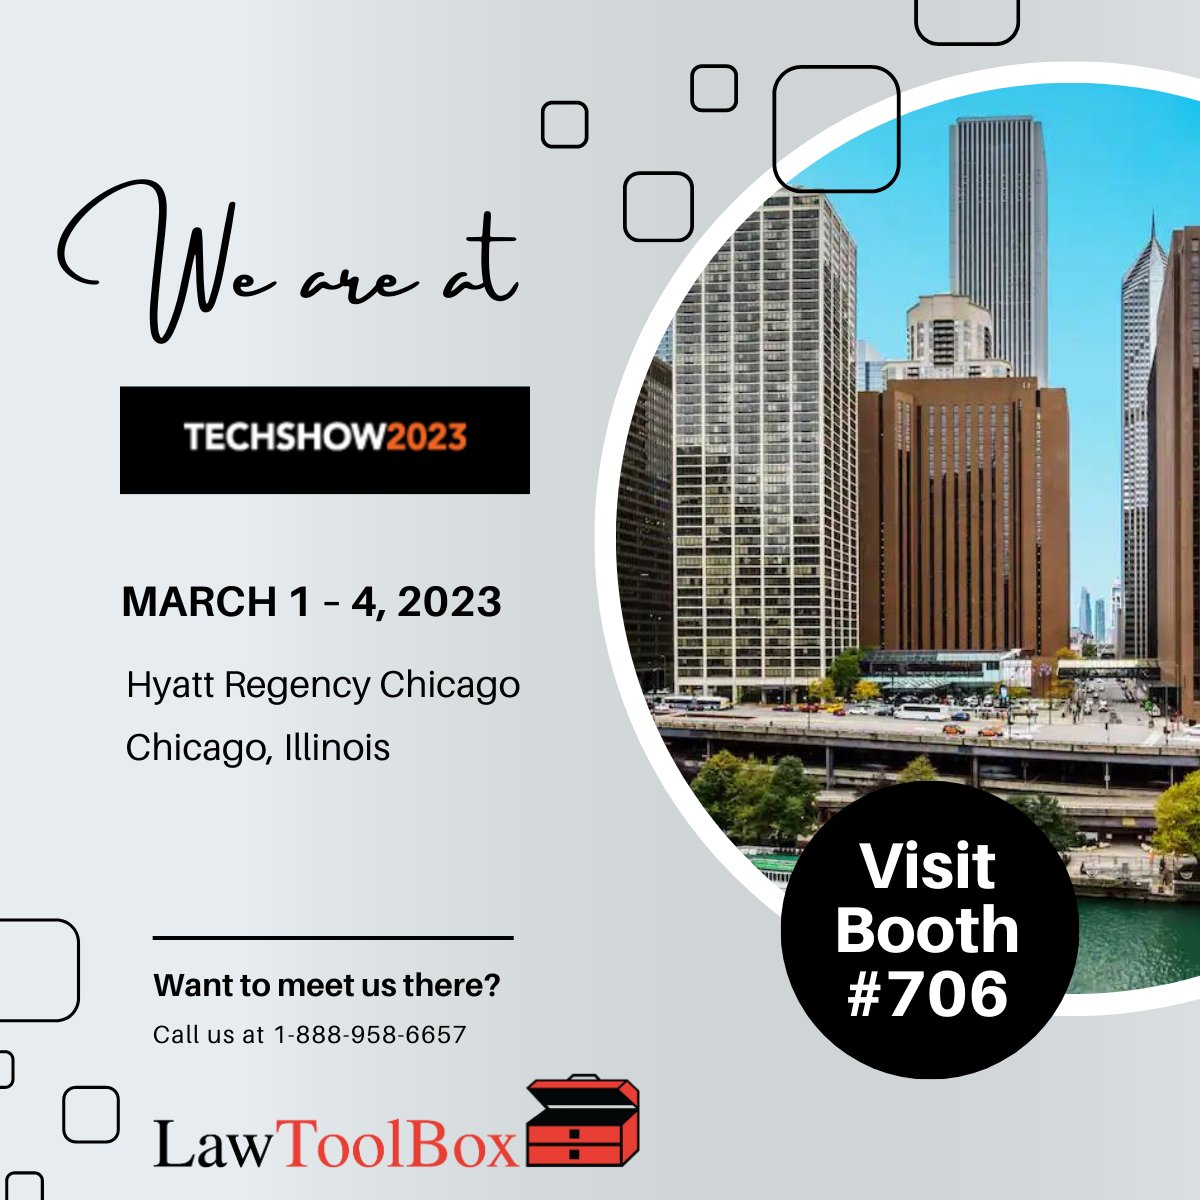 It’s almost time for ABA TECHSHOW 2023! We're excited to sponsor this fantastic event and to meet folks at Booth #706. Come say hi! We'll have some cool giveaways, showcasing some of our latest features. See you soon! #legaltech #abatechshow